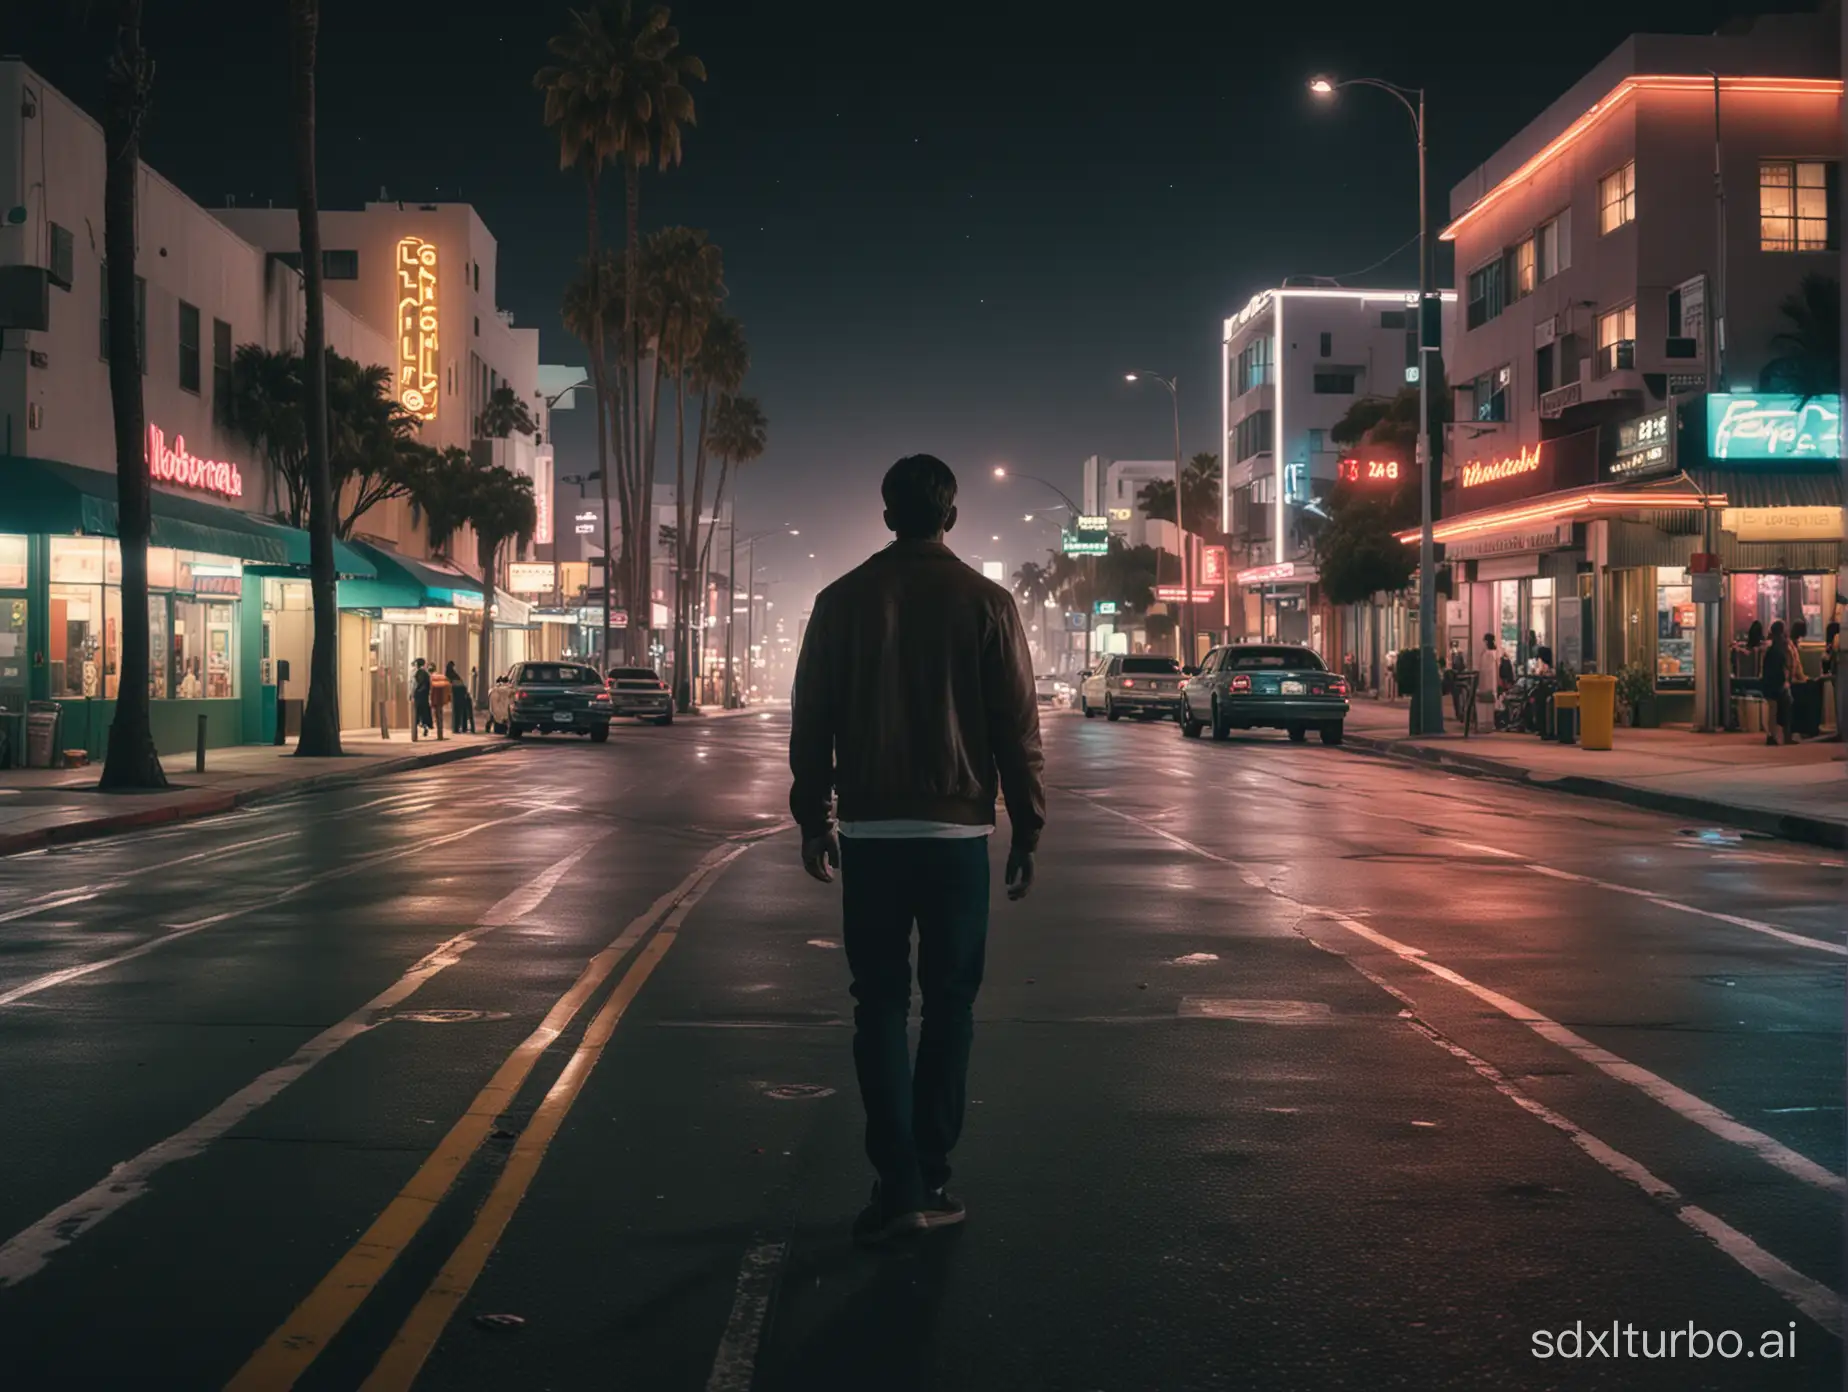 real photography, not draw. lubesky cinematographer style,  style ultrarealistic of los angeles downtons streets near the beach, at night, with only one person lonely with his back close to the camera, ultraquality, 8k, with some futuristic buildings, very colorful, Shot in a film 4k large format with ryan gosling close to the camera, shot on kodak film stock with 21mm lens